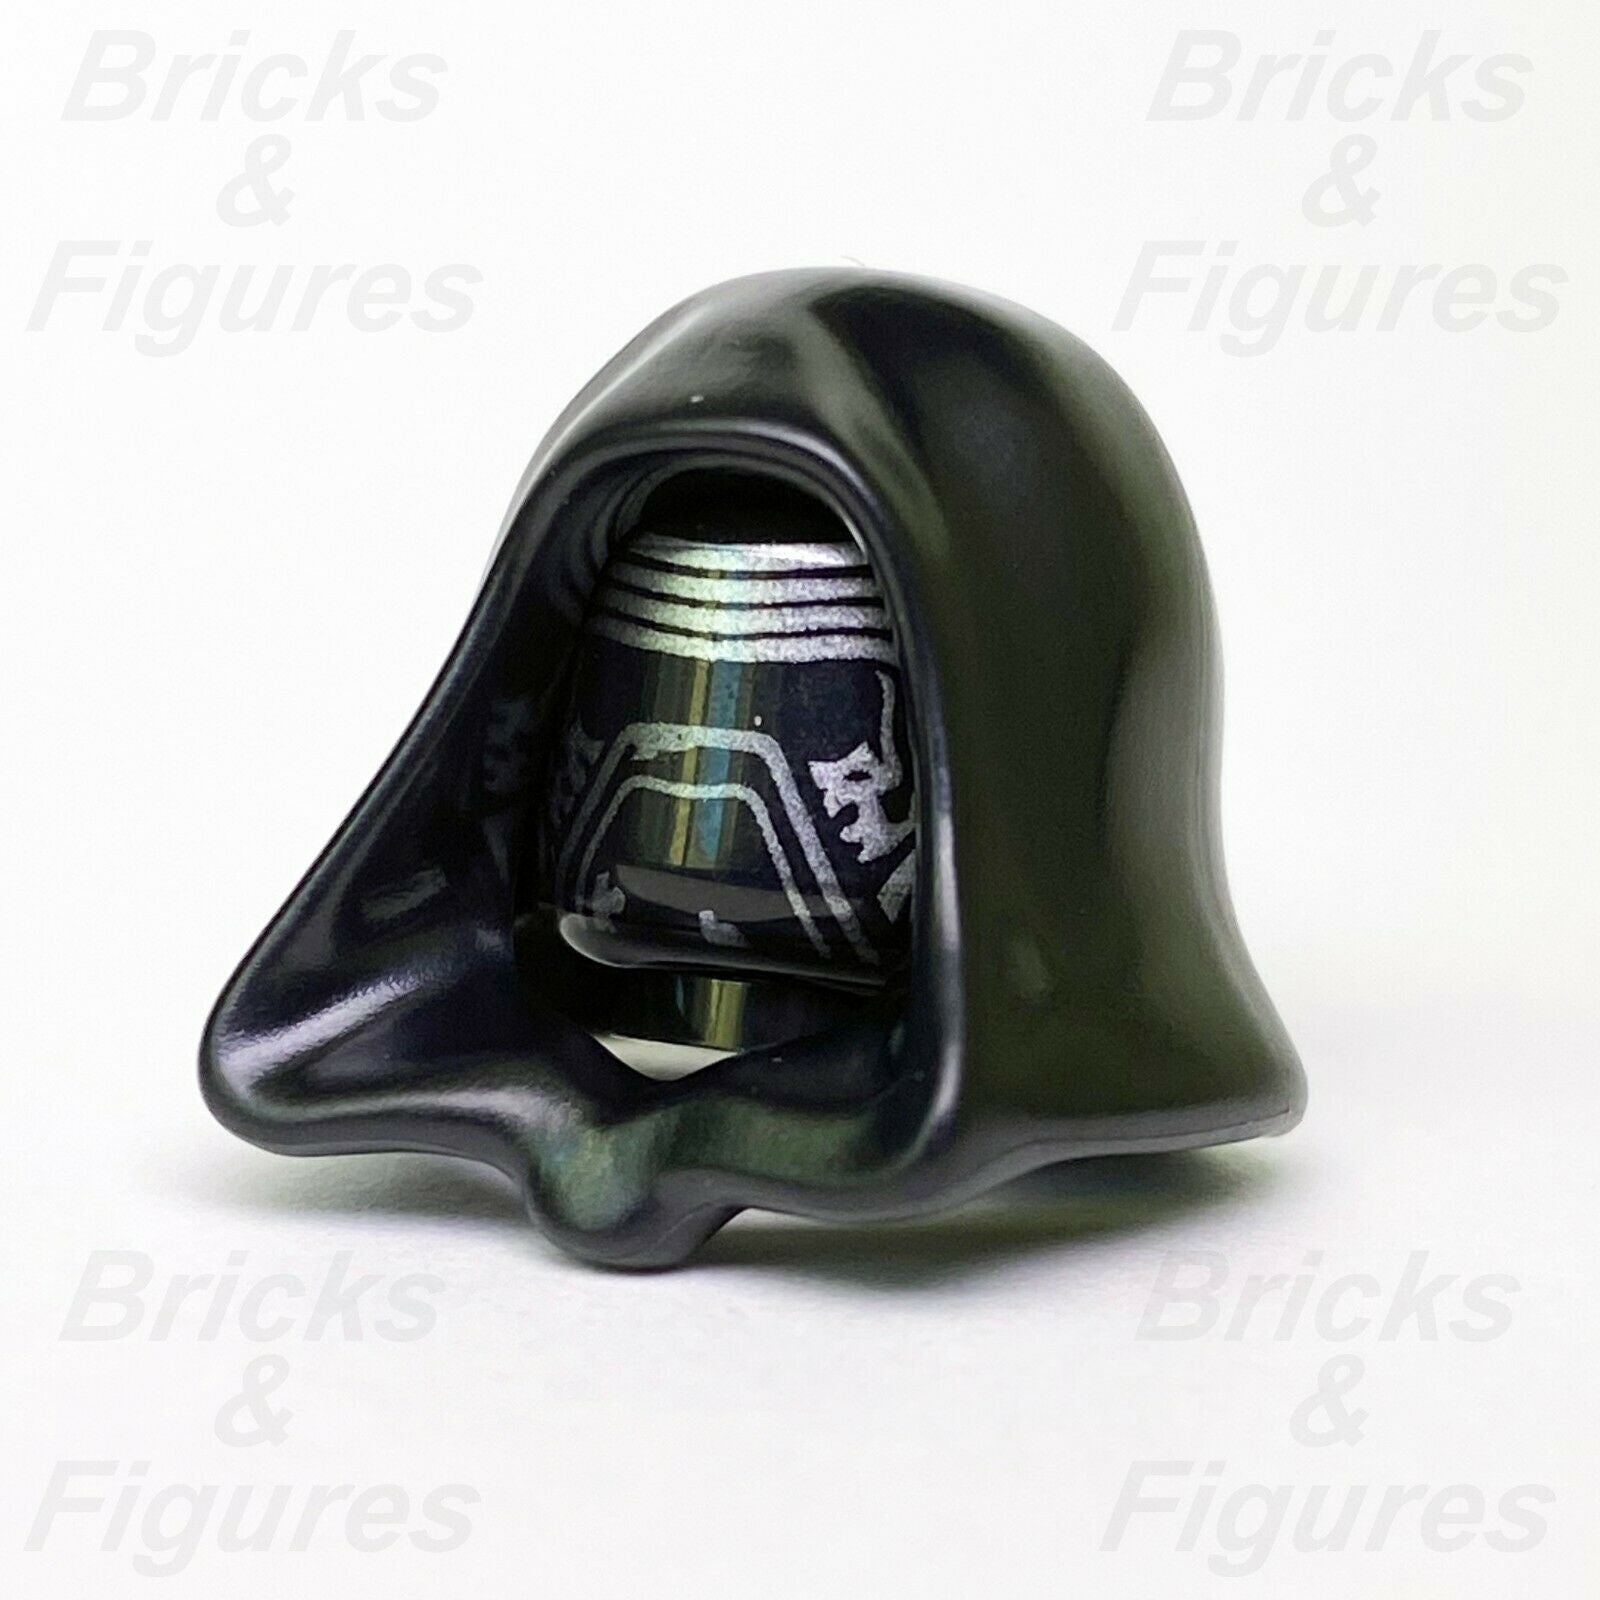 New Star Wars LEGO® Kylo Ren's Sith Mask with Black Hood First Order 75104 - Bricks & Figures